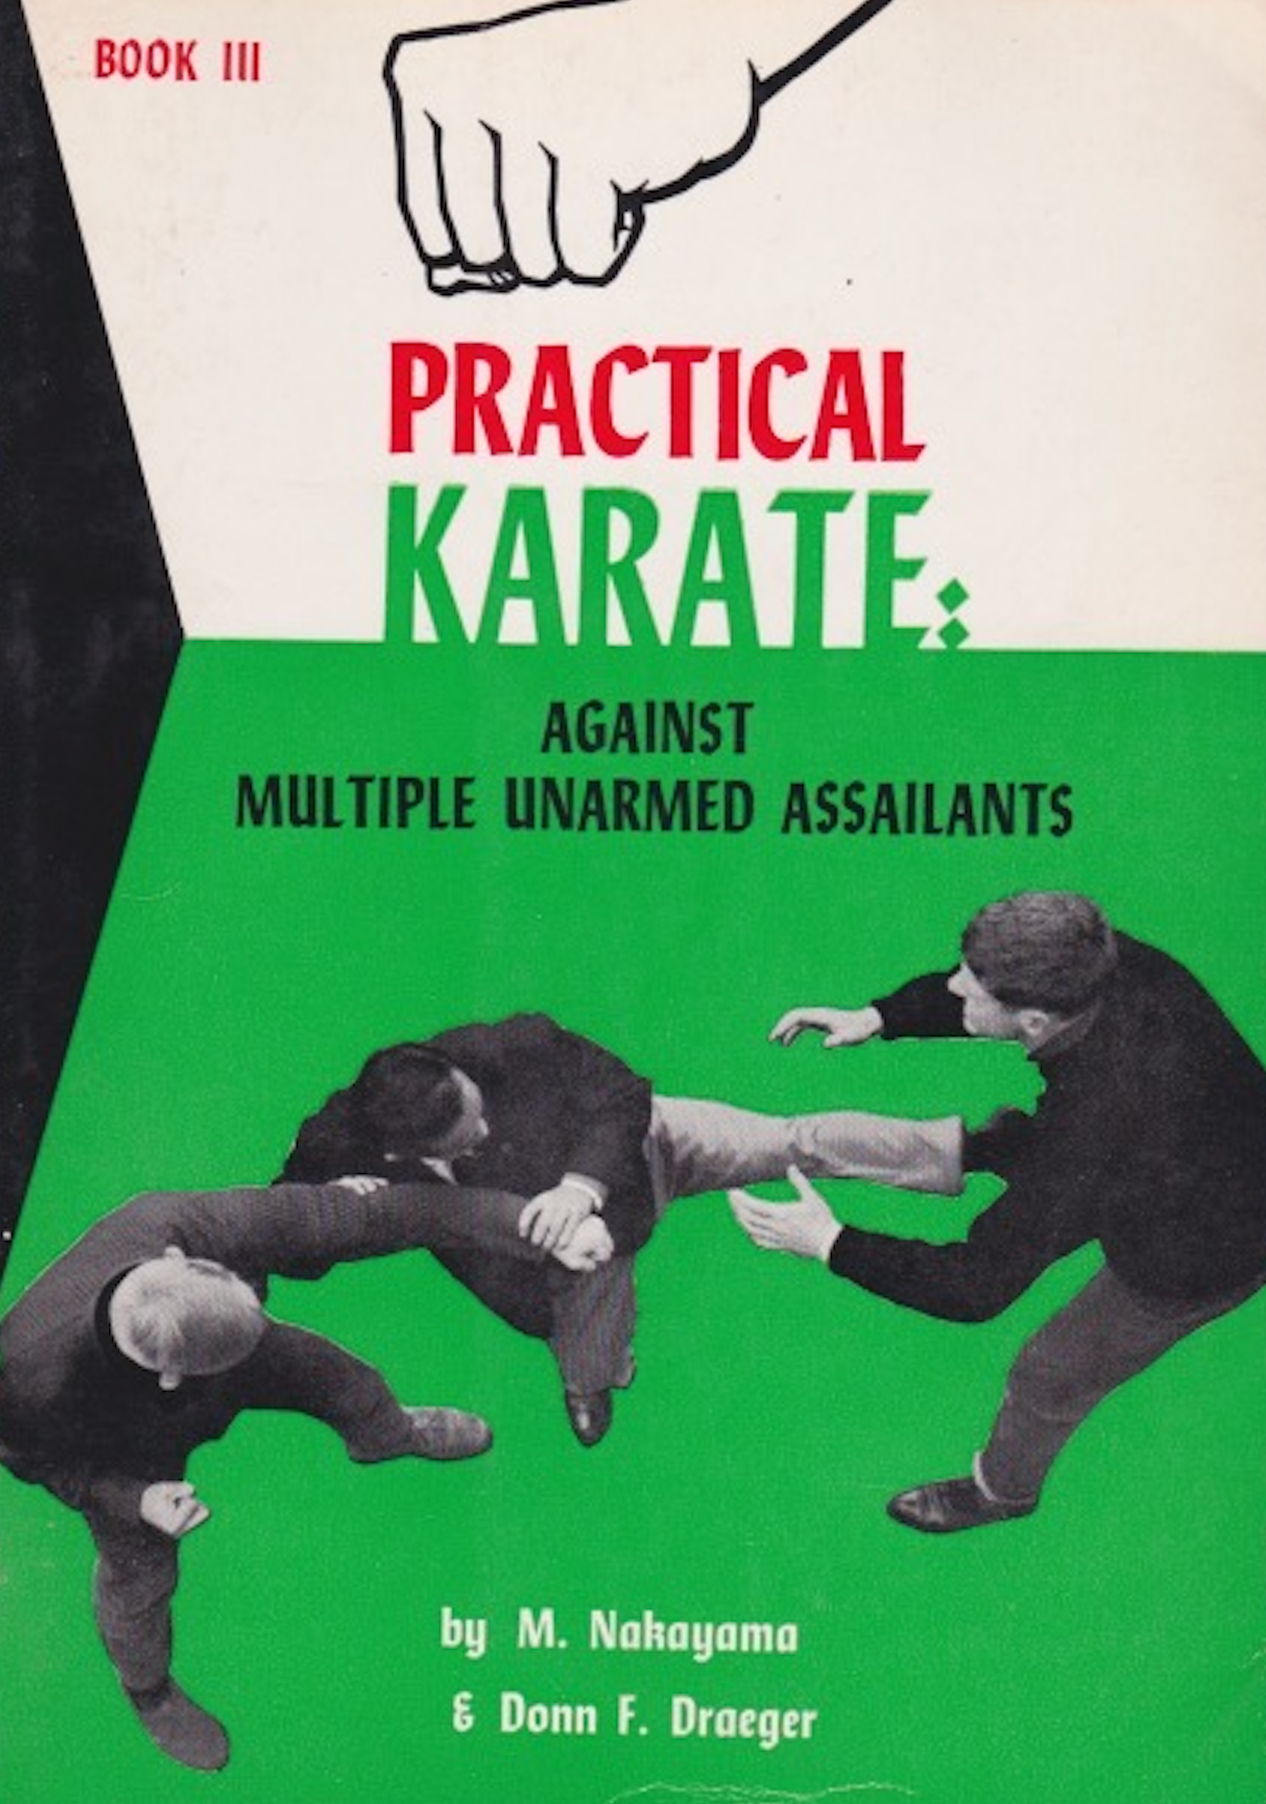 Practical Karate Book 3: Against Multiple Unarmed Assailants by Masatoshi Nakayama & Donn Draeger (Preowned)